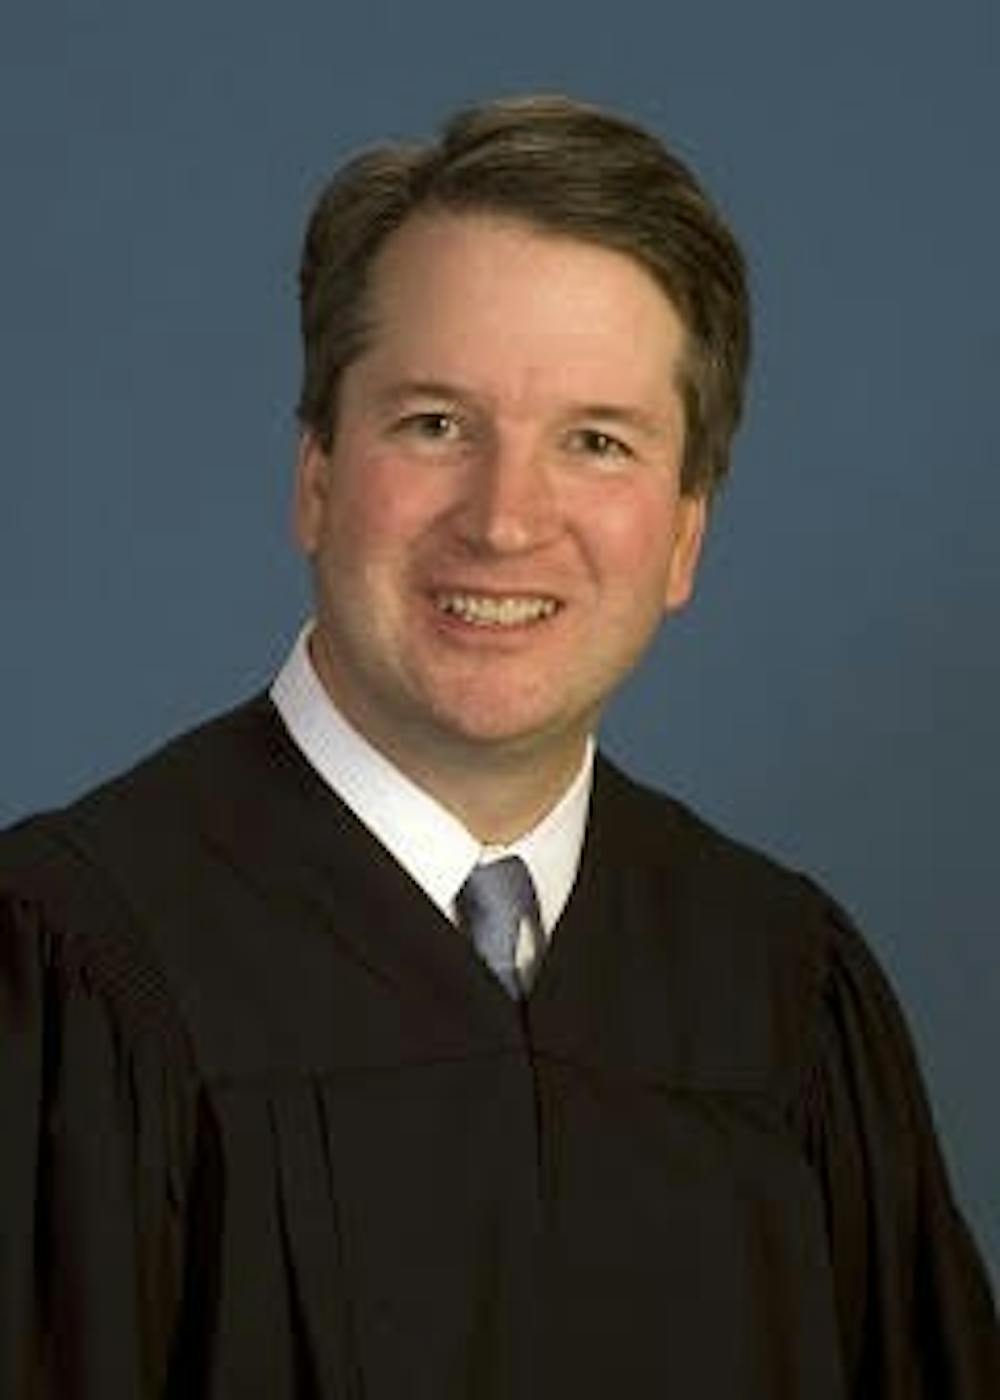 Judge Brett Kavanaugh, U.S. Court of Appeals for the District of Columbia Circuit.